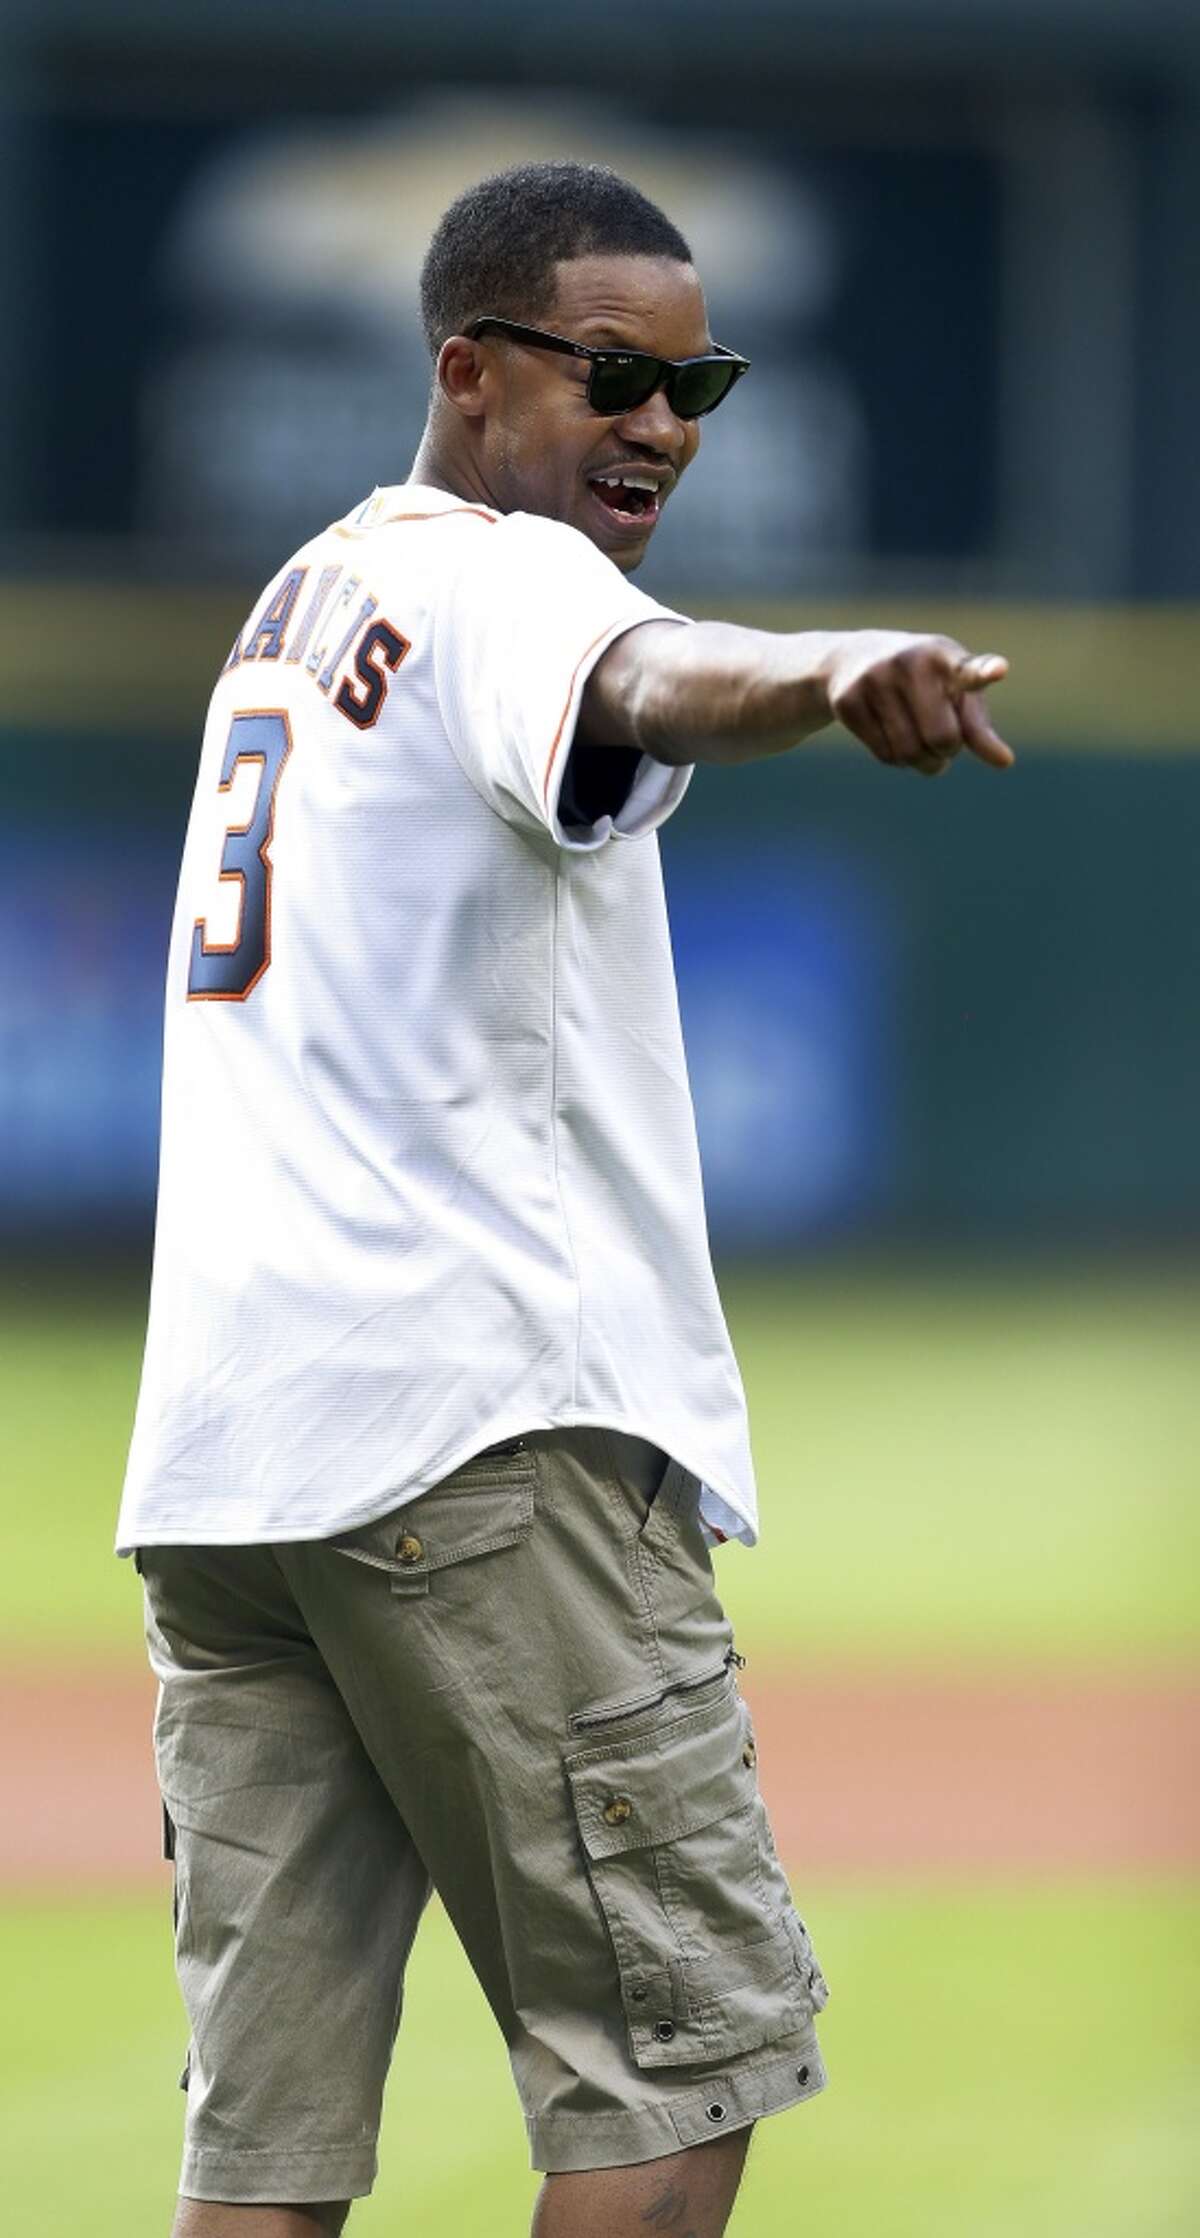 Former Houston Rocket Steve Francis throws out the first pitch before the start of an MLB game at Minute Maid Park on Tuesday, June 2, 2015, in Houston. ( Karen Warren / Houston Chronicle )